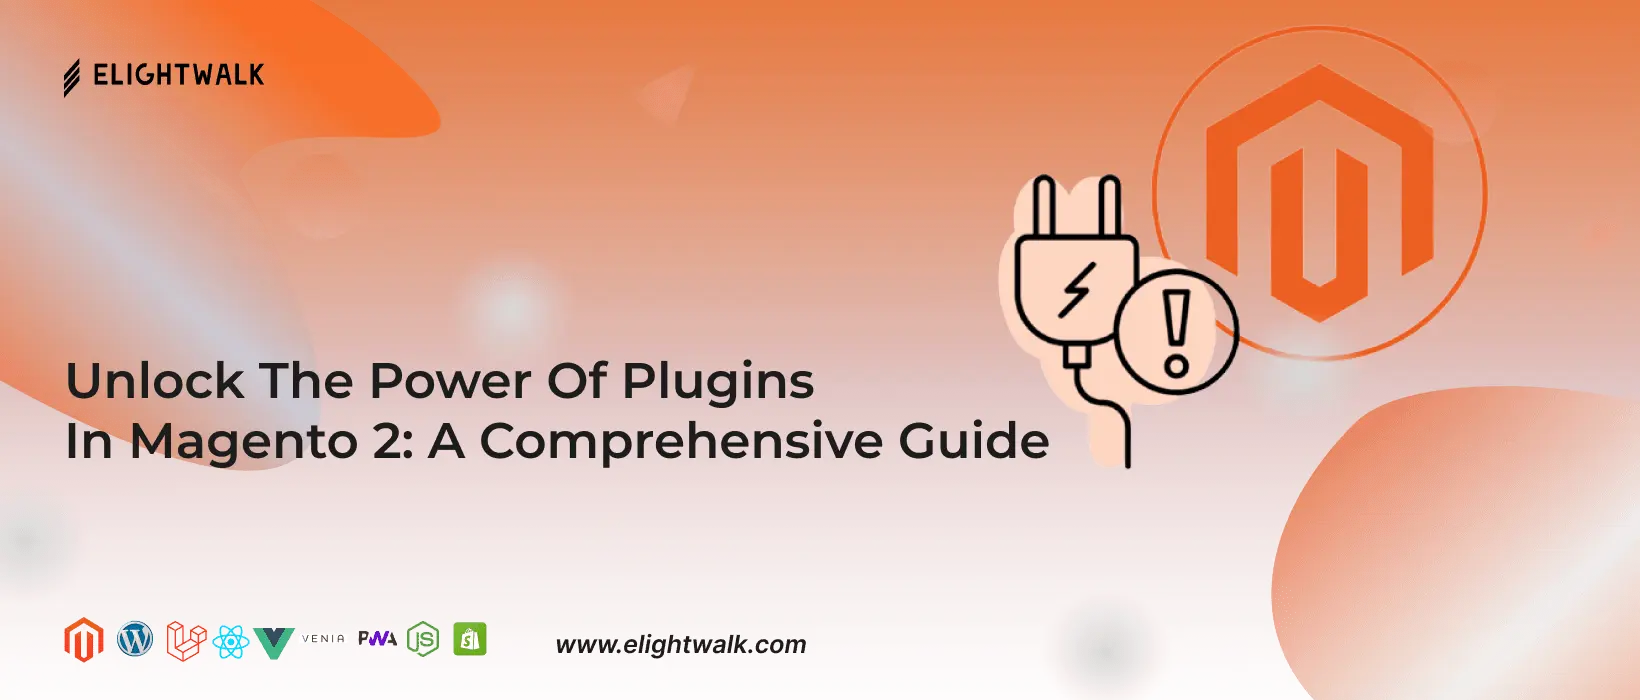 Unlock The Power Of Plugins In Magento 2: A Comprehensive Guide